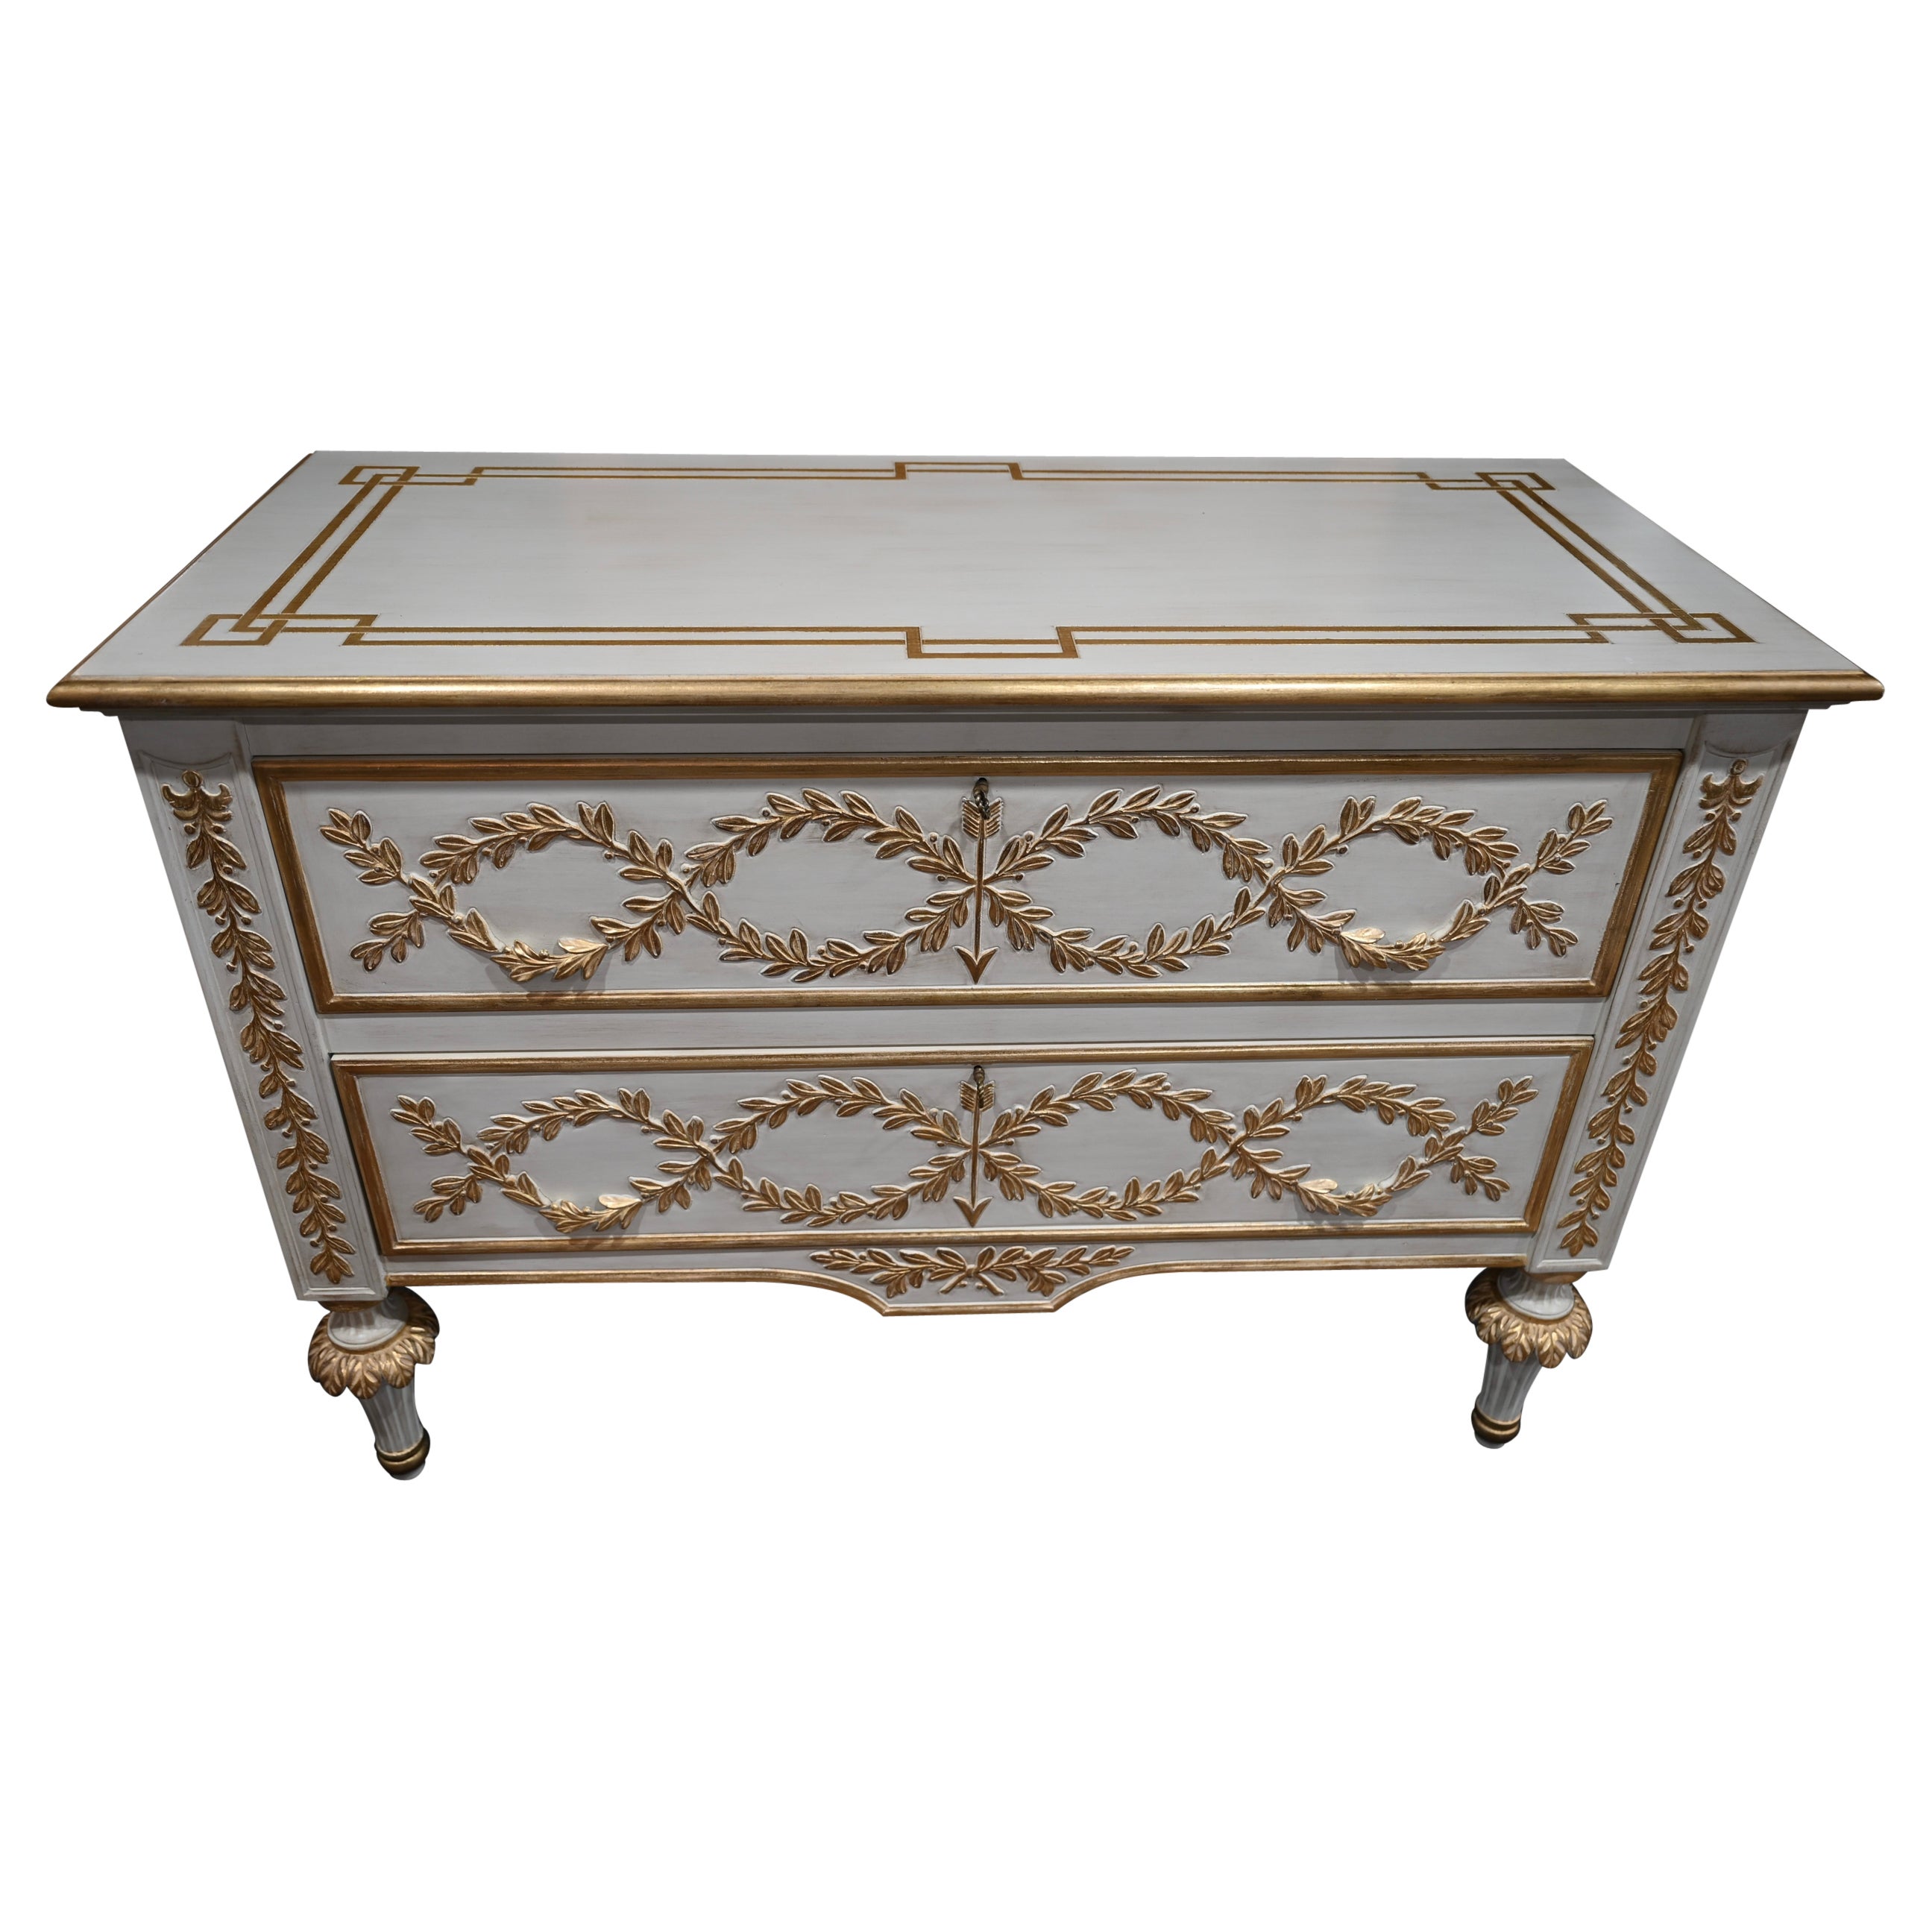 Italian Neoclassical Louis XVI Style Hand-Painted Chest of Drawers